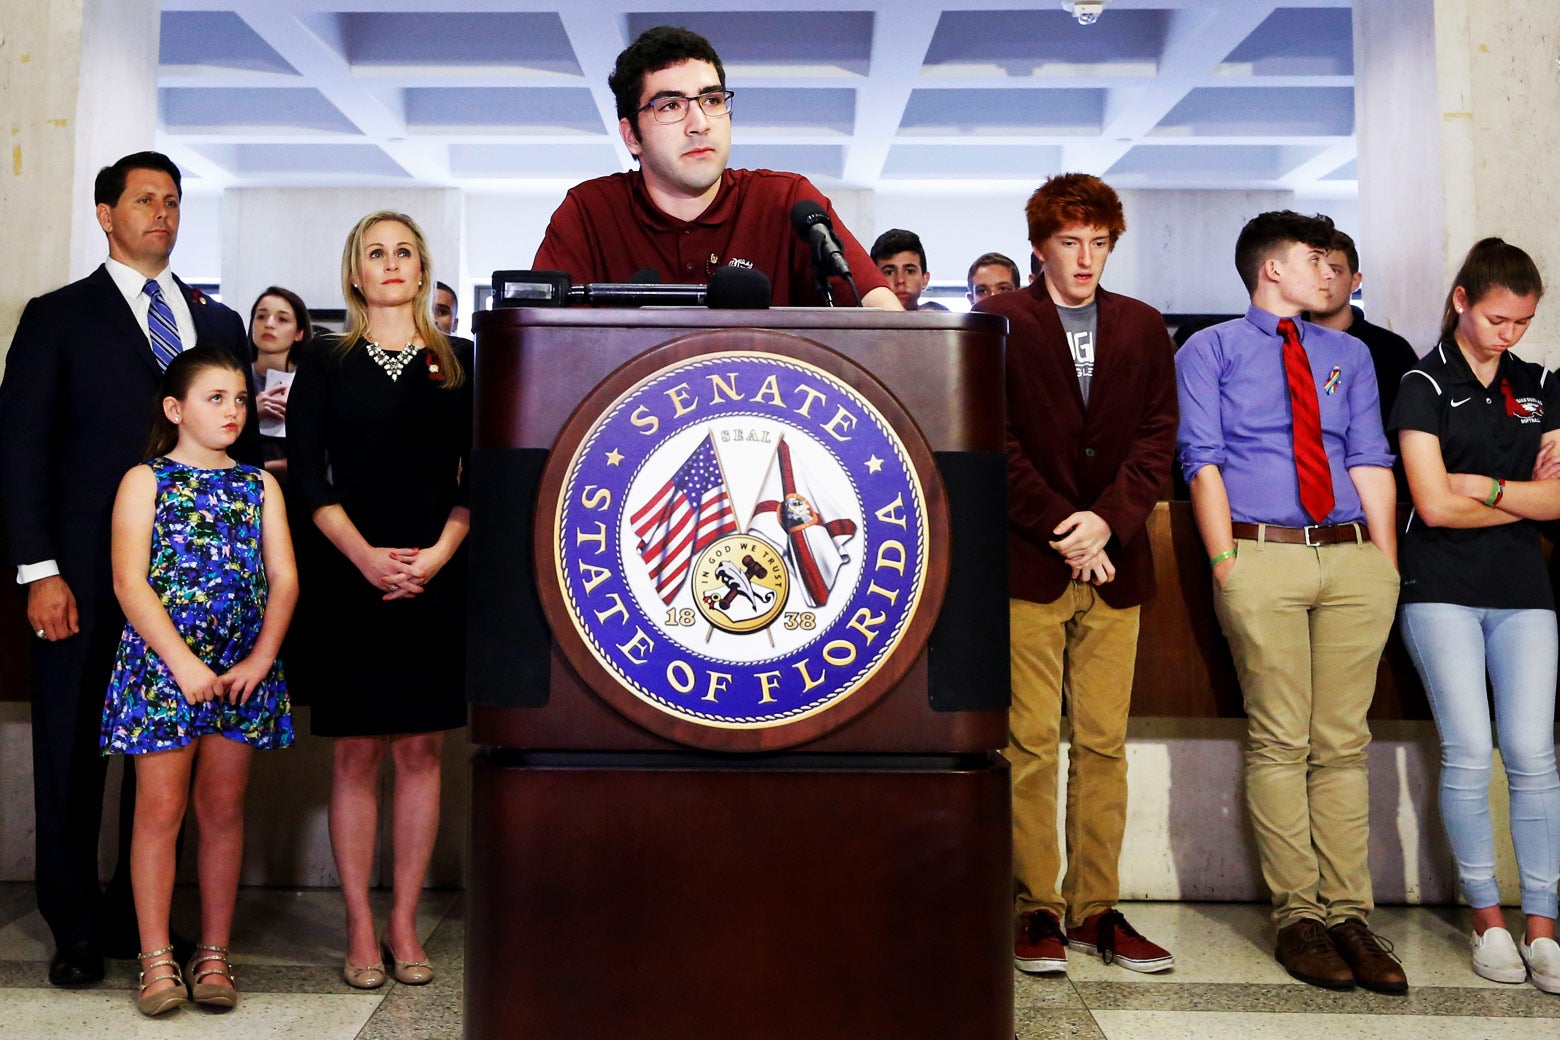 Lorenzo Prado stands at a podium with fellow survivors and family members behind him.